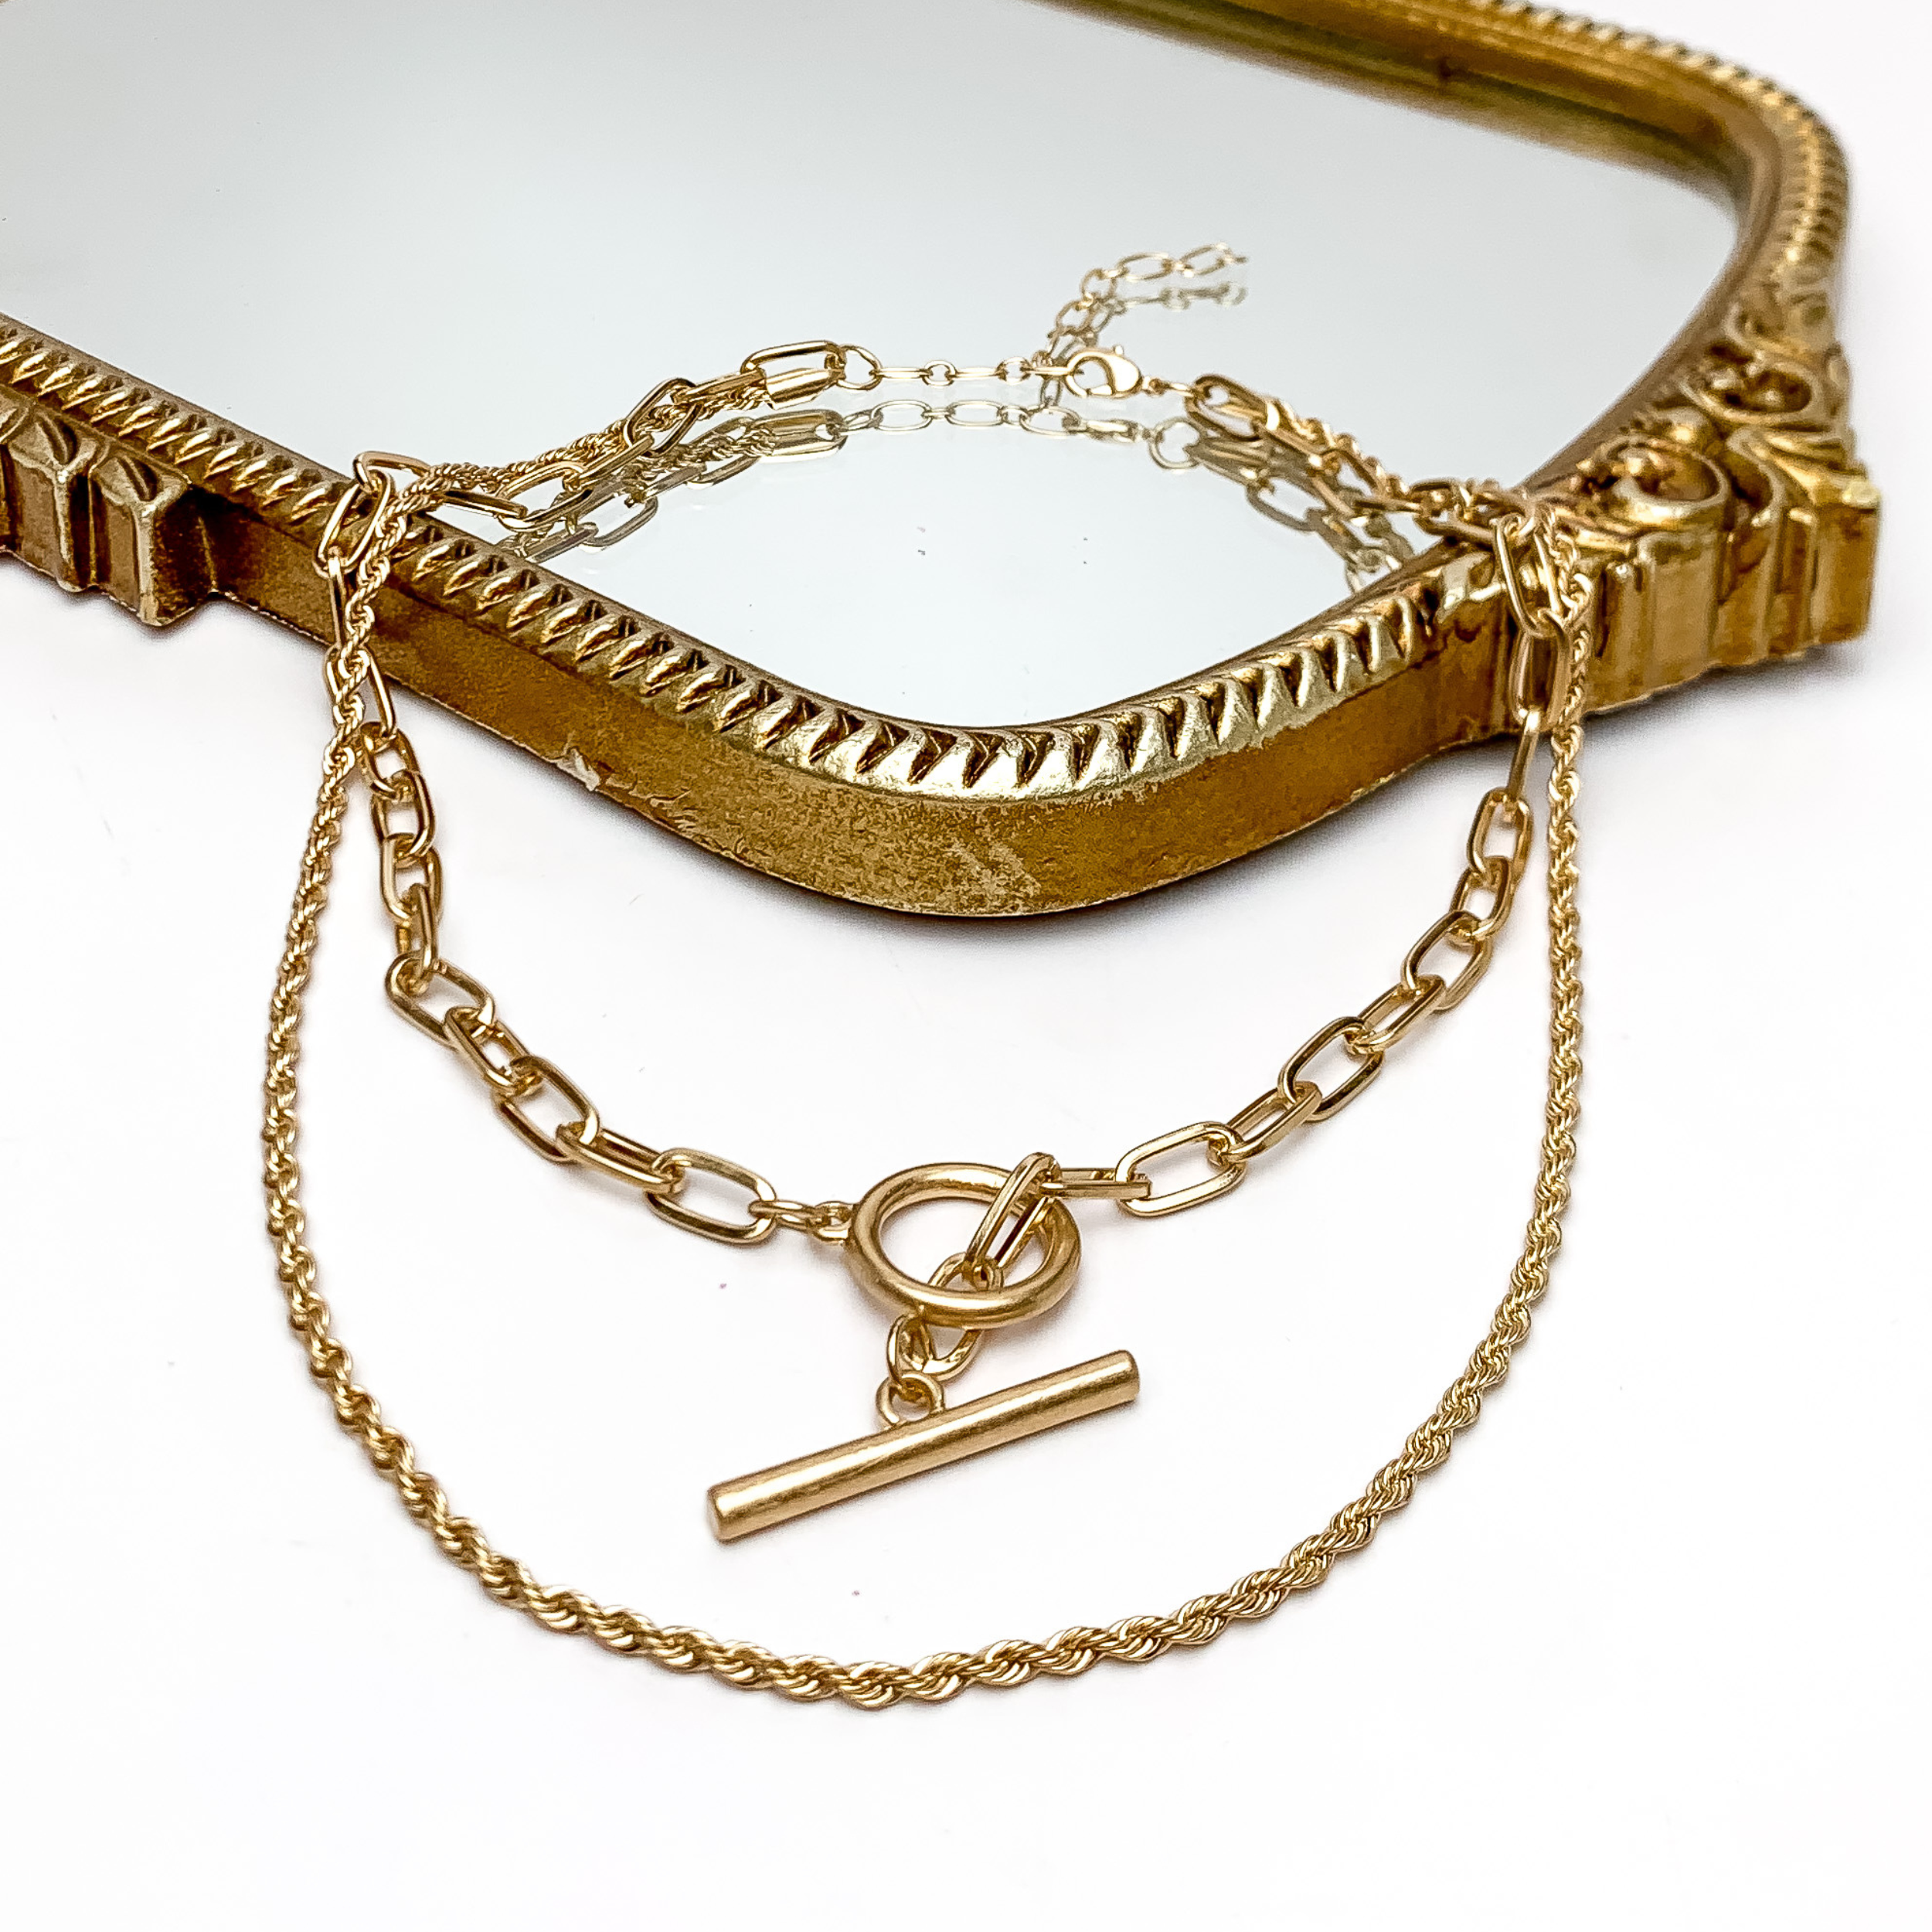 Tiki Gold Double Chain Necklace With Front Toggle. Pictured on a white background with part of the necklace laying on a gold trimmed mirror.